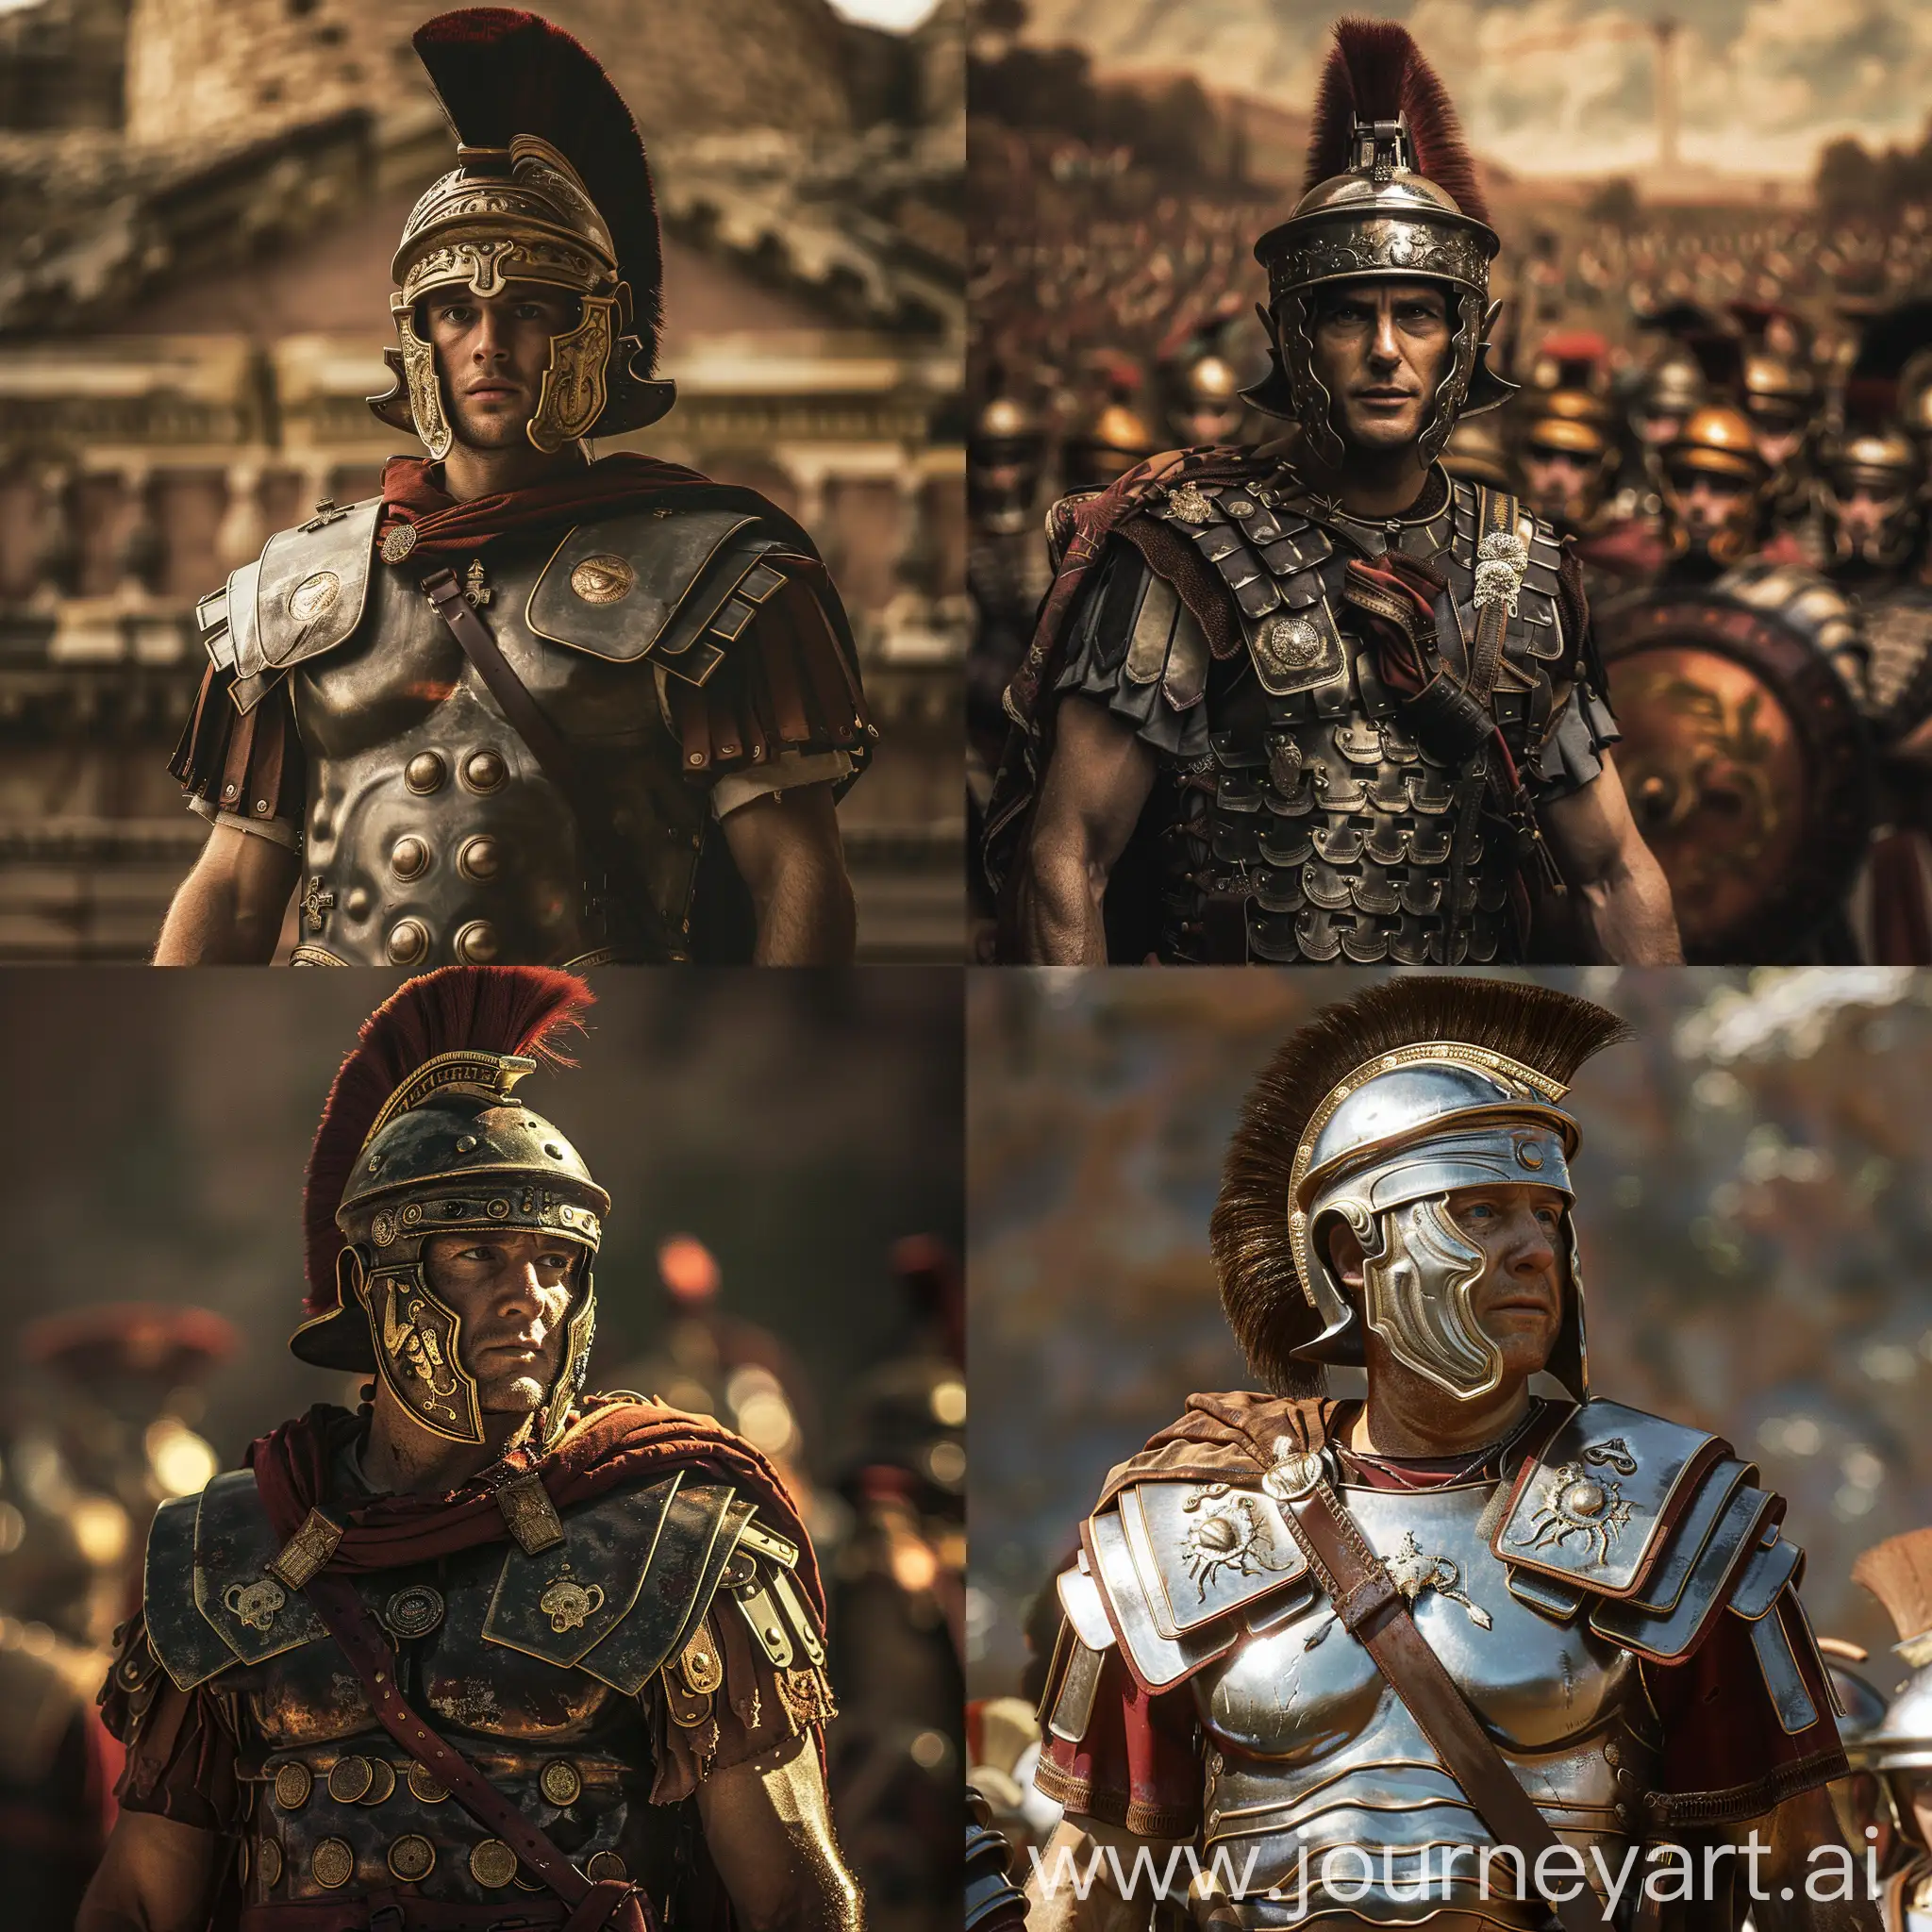 Serious-Roman-Soldier-in-Detailed-Armor-Amidst-Military-Background